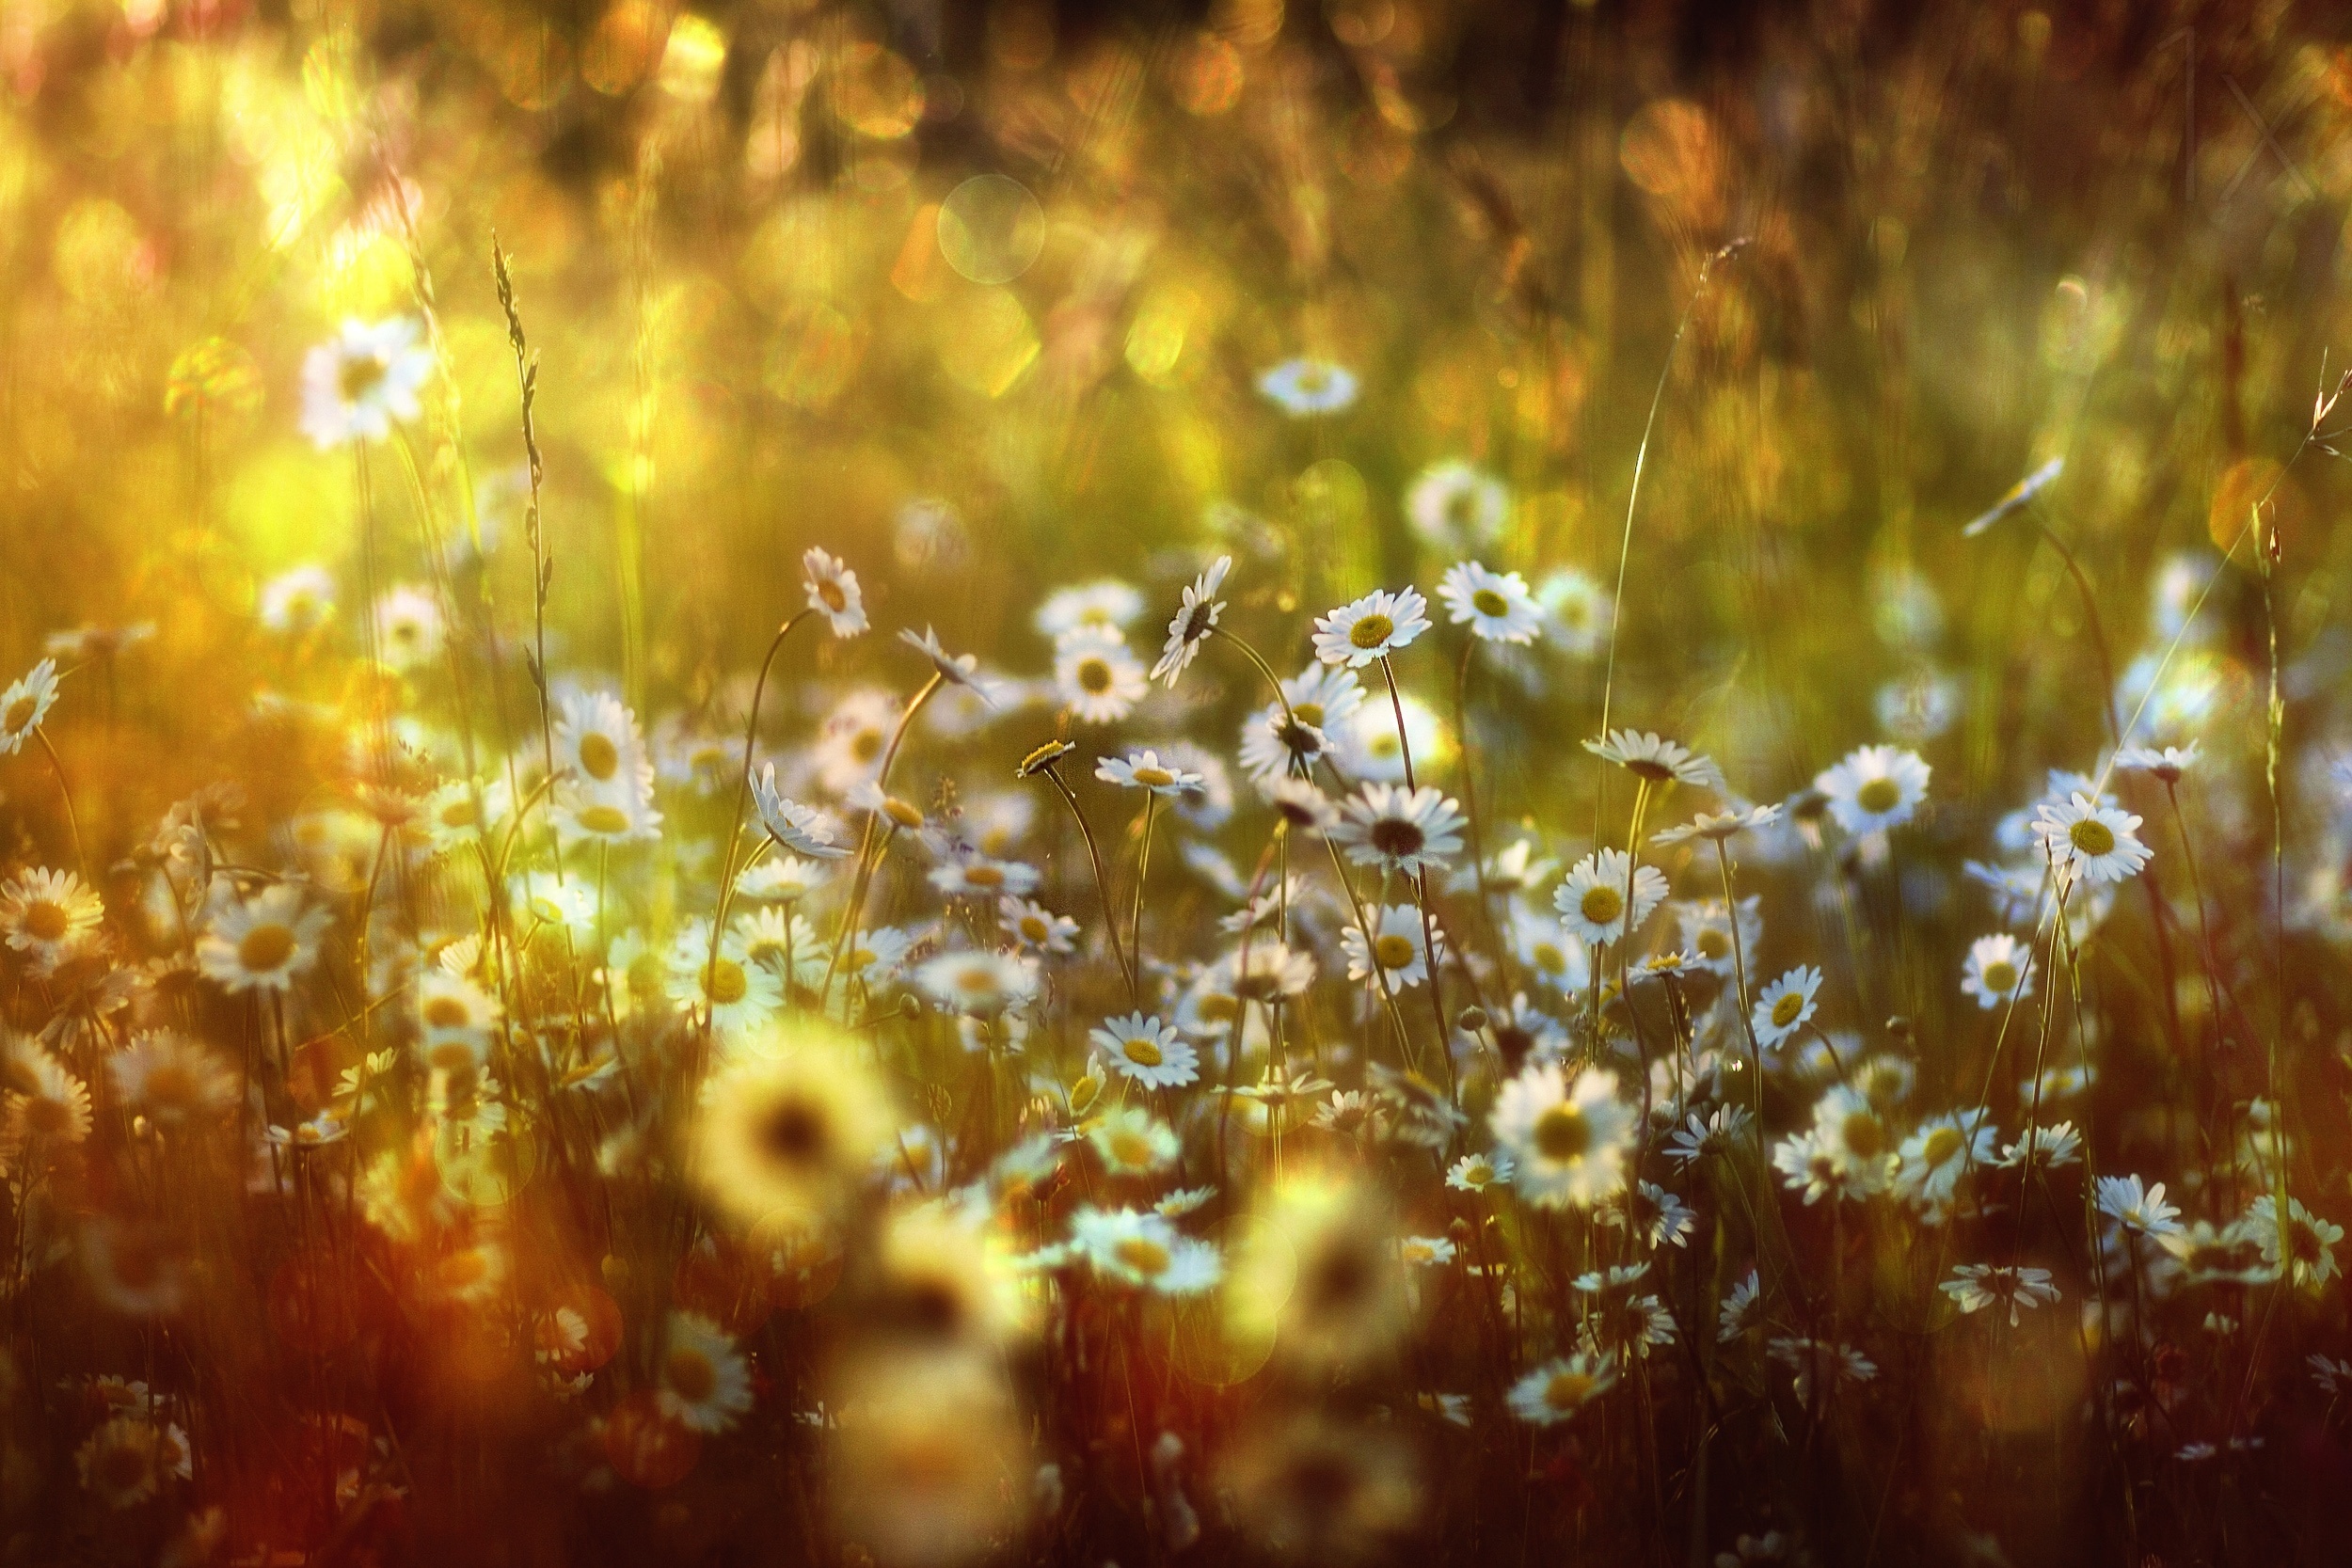 GoodFon.com - Free Wallpapers, download. grass, light, flowers, chamomile, ...